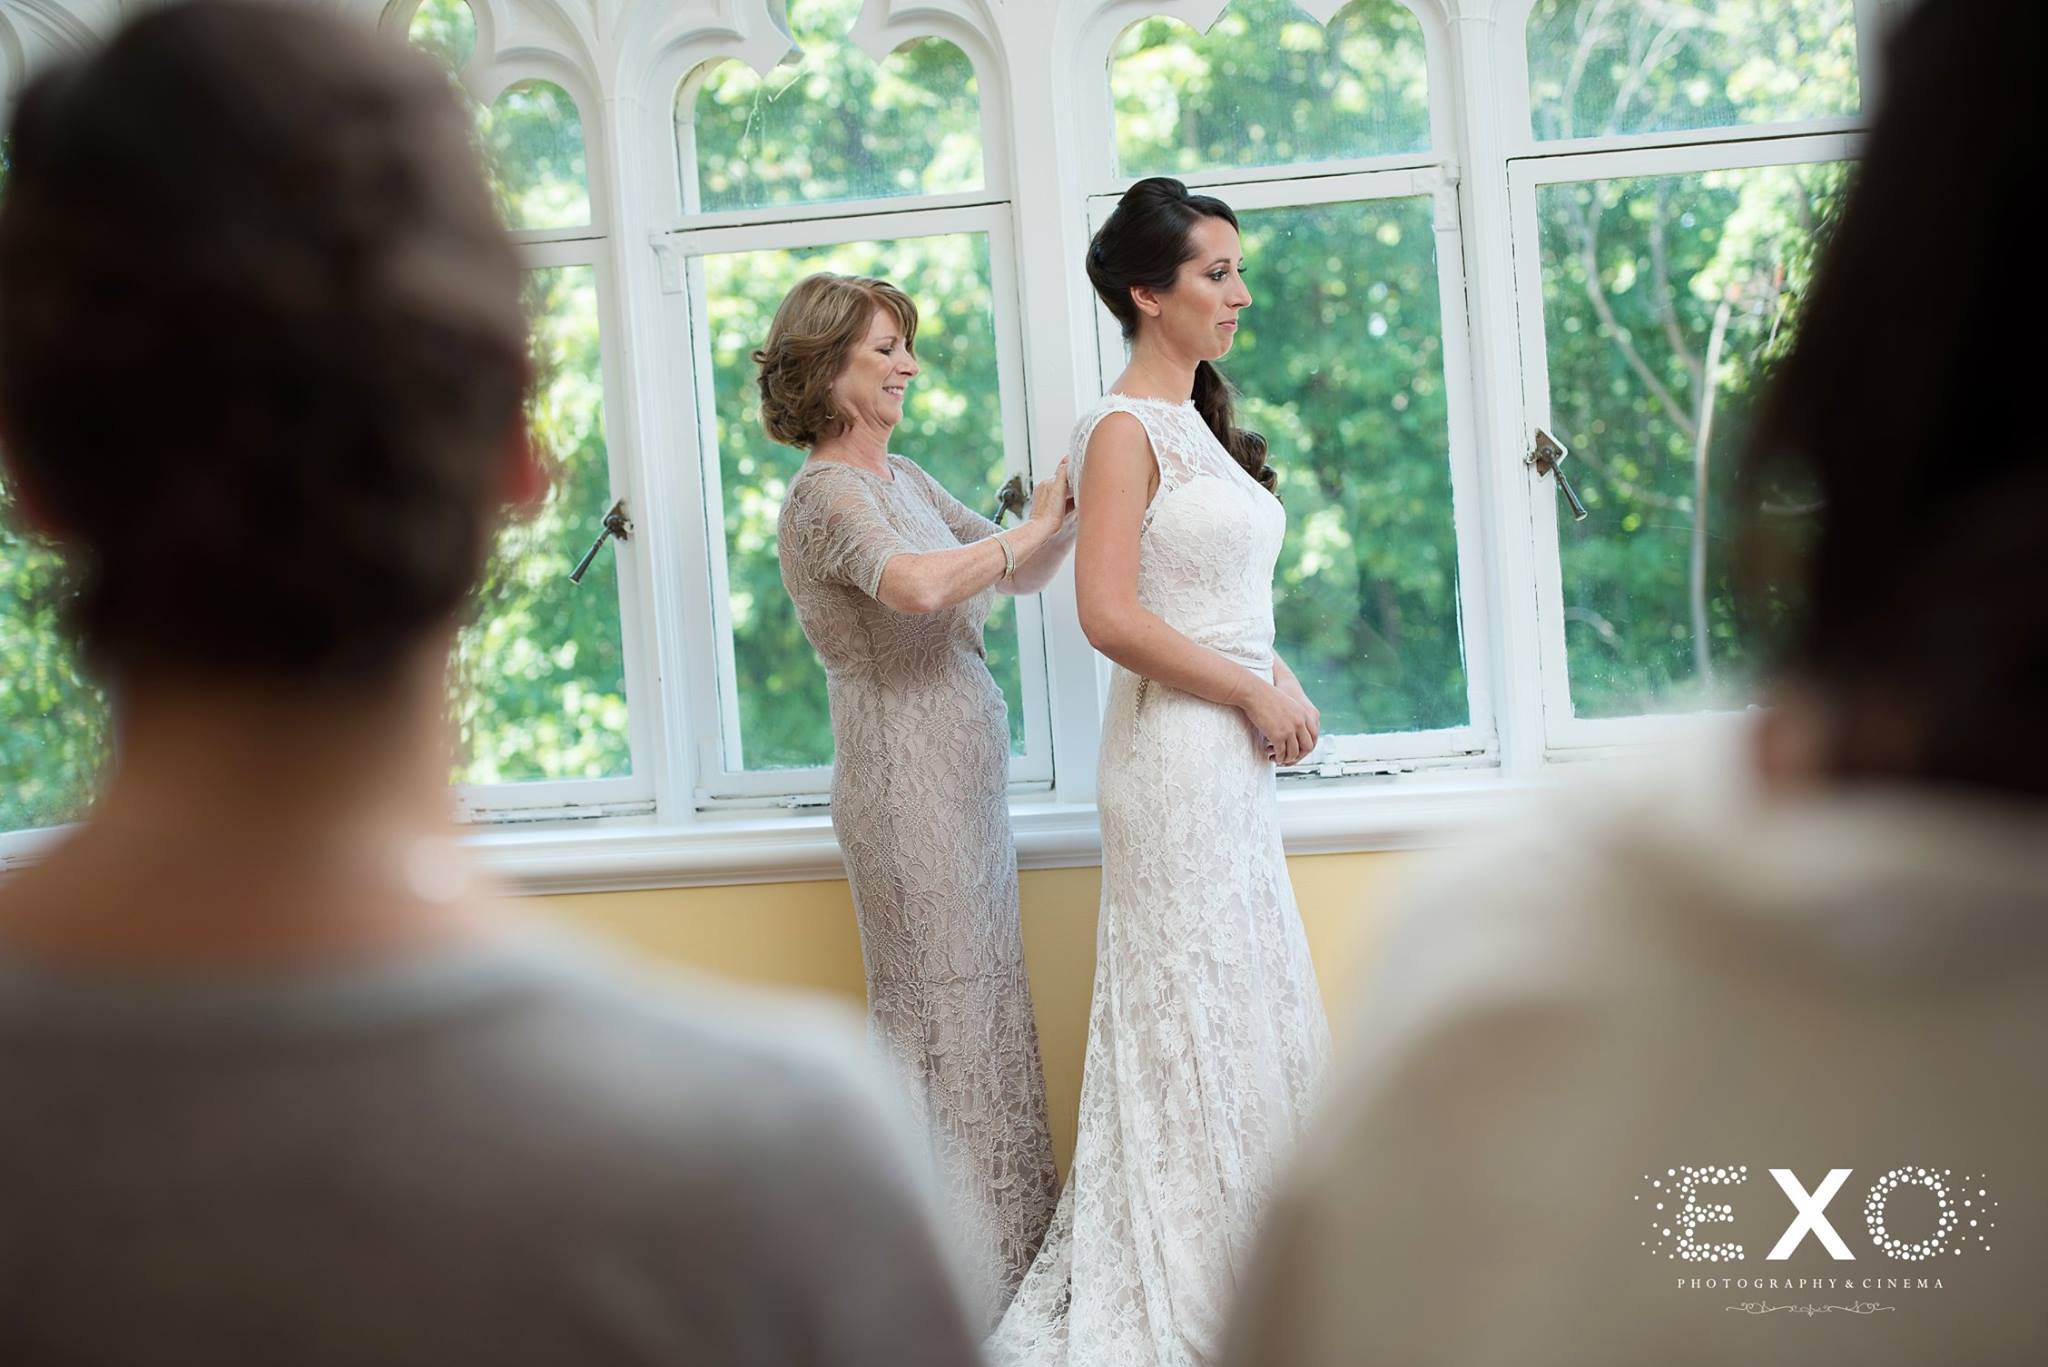 bride and mother adjusting gown by window